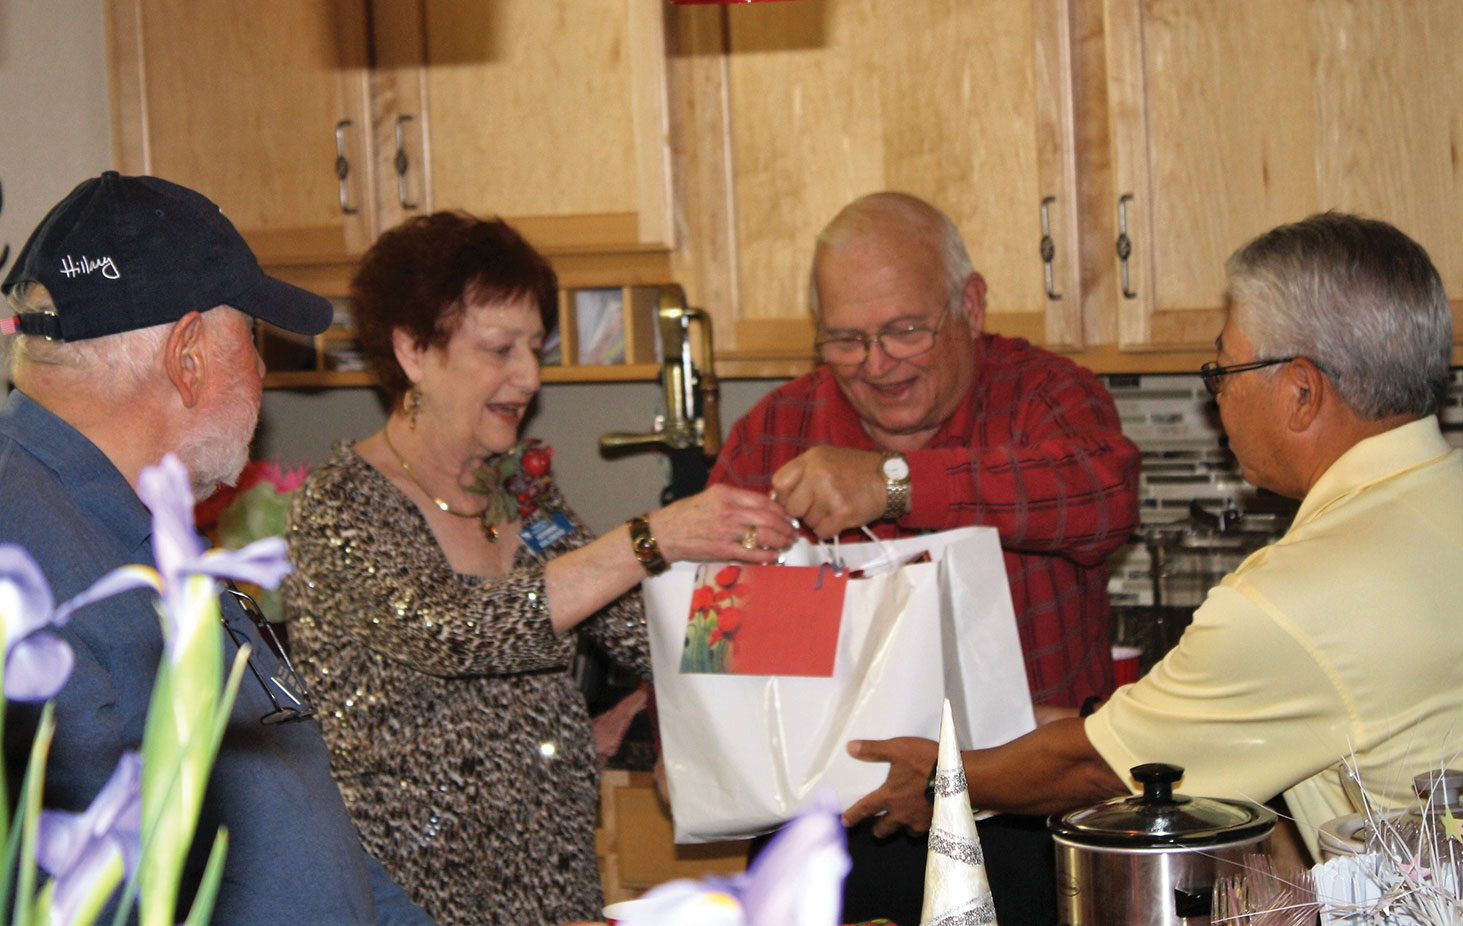 Members of the PebbleCreek Car Club enjoy a lively gift exchange at their annual holiday party.